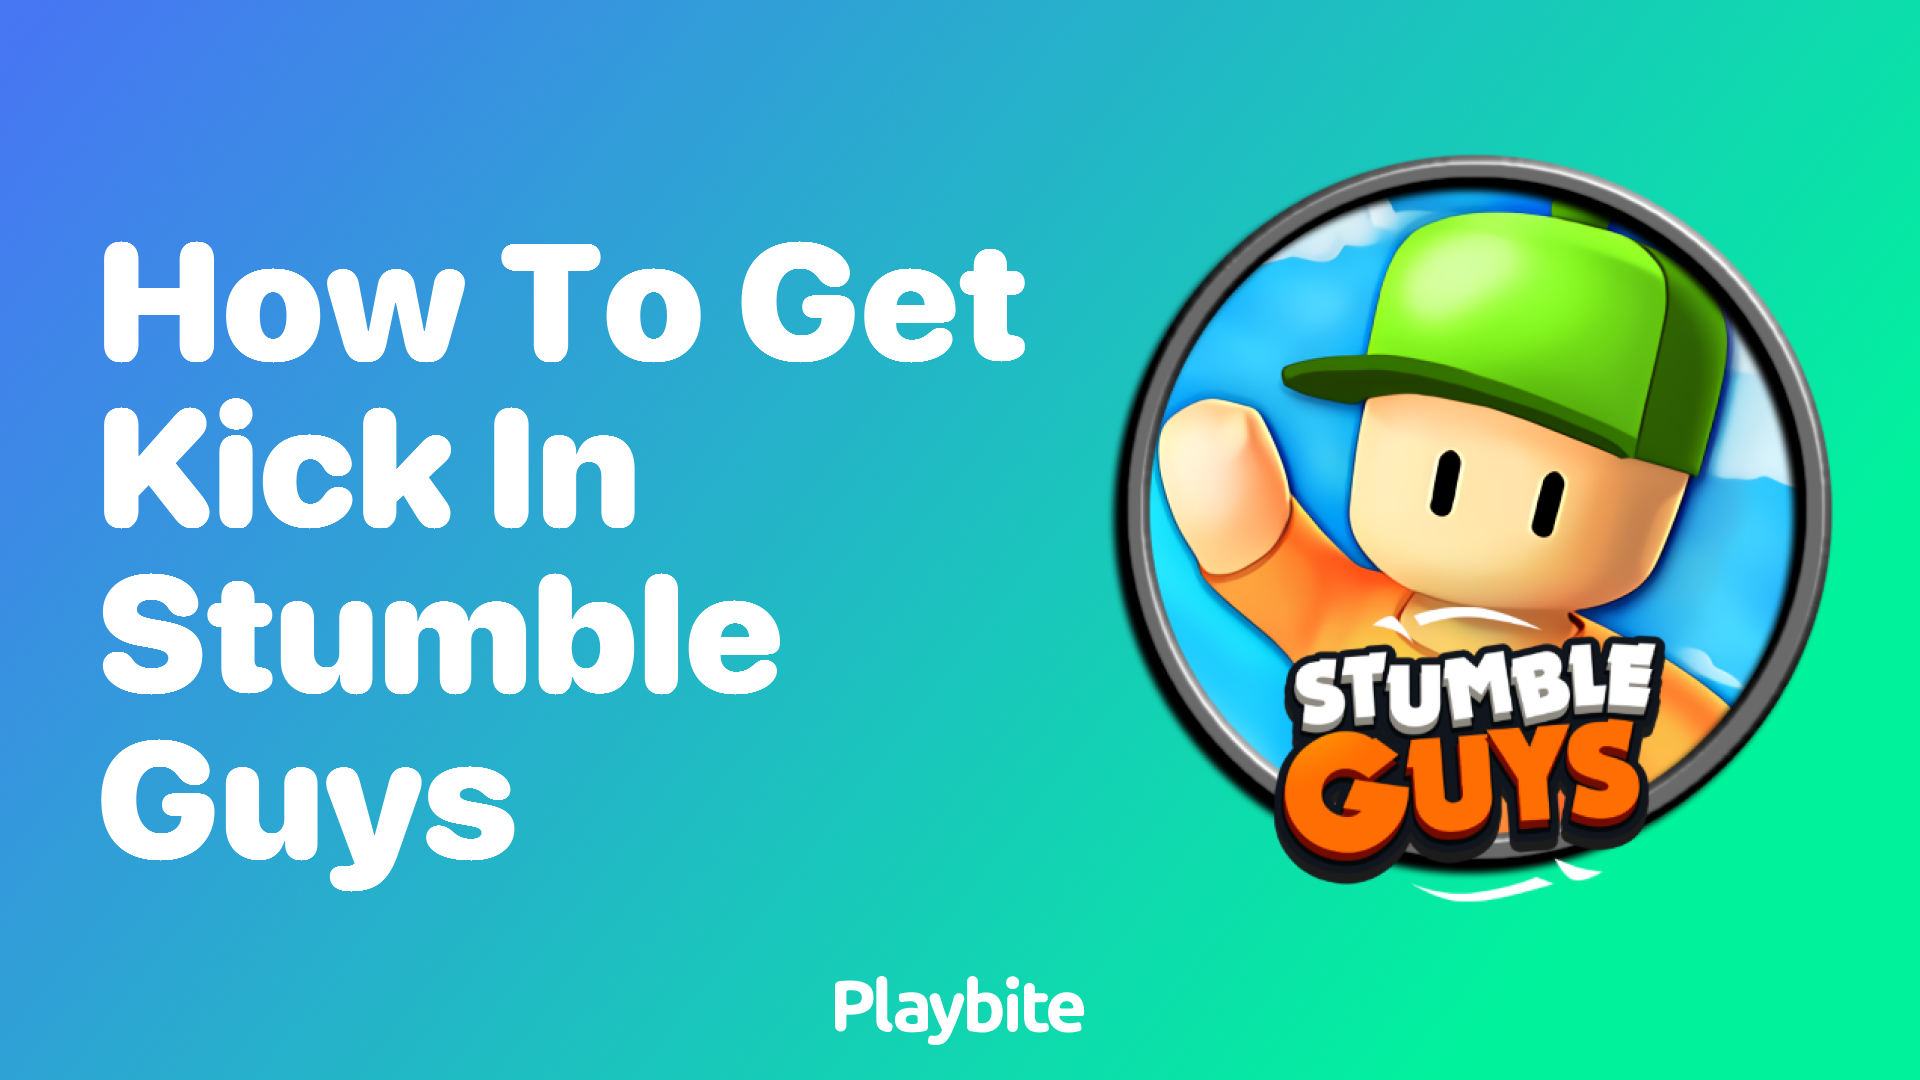 How to Get a Kick in Stumble Guys